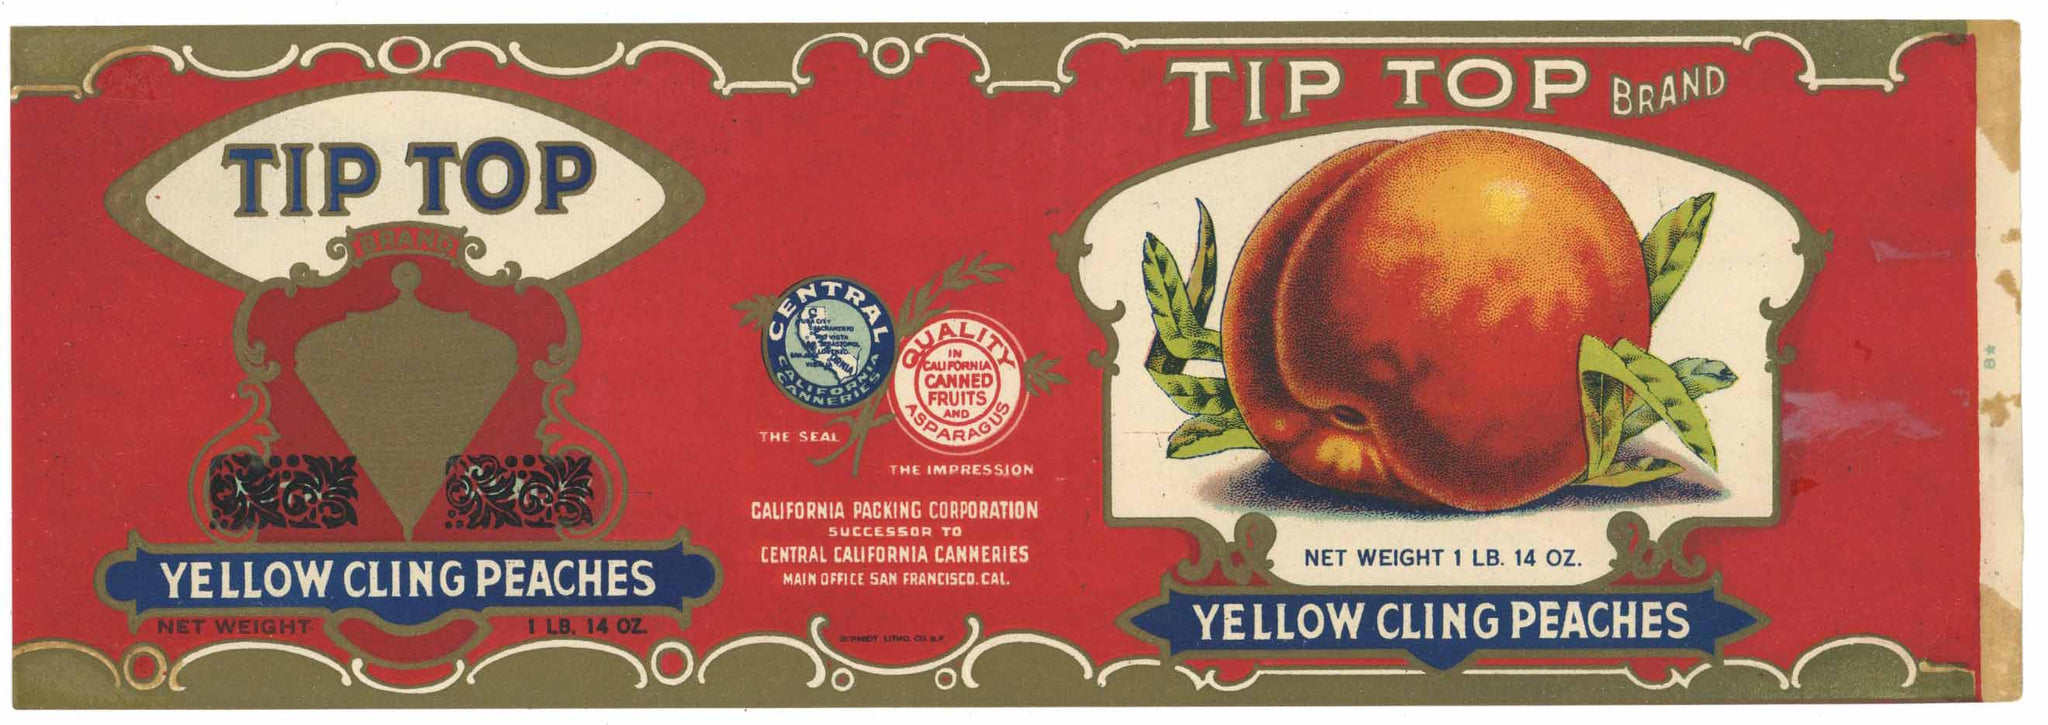 Tip Top Brand Vintage Peach Can Label